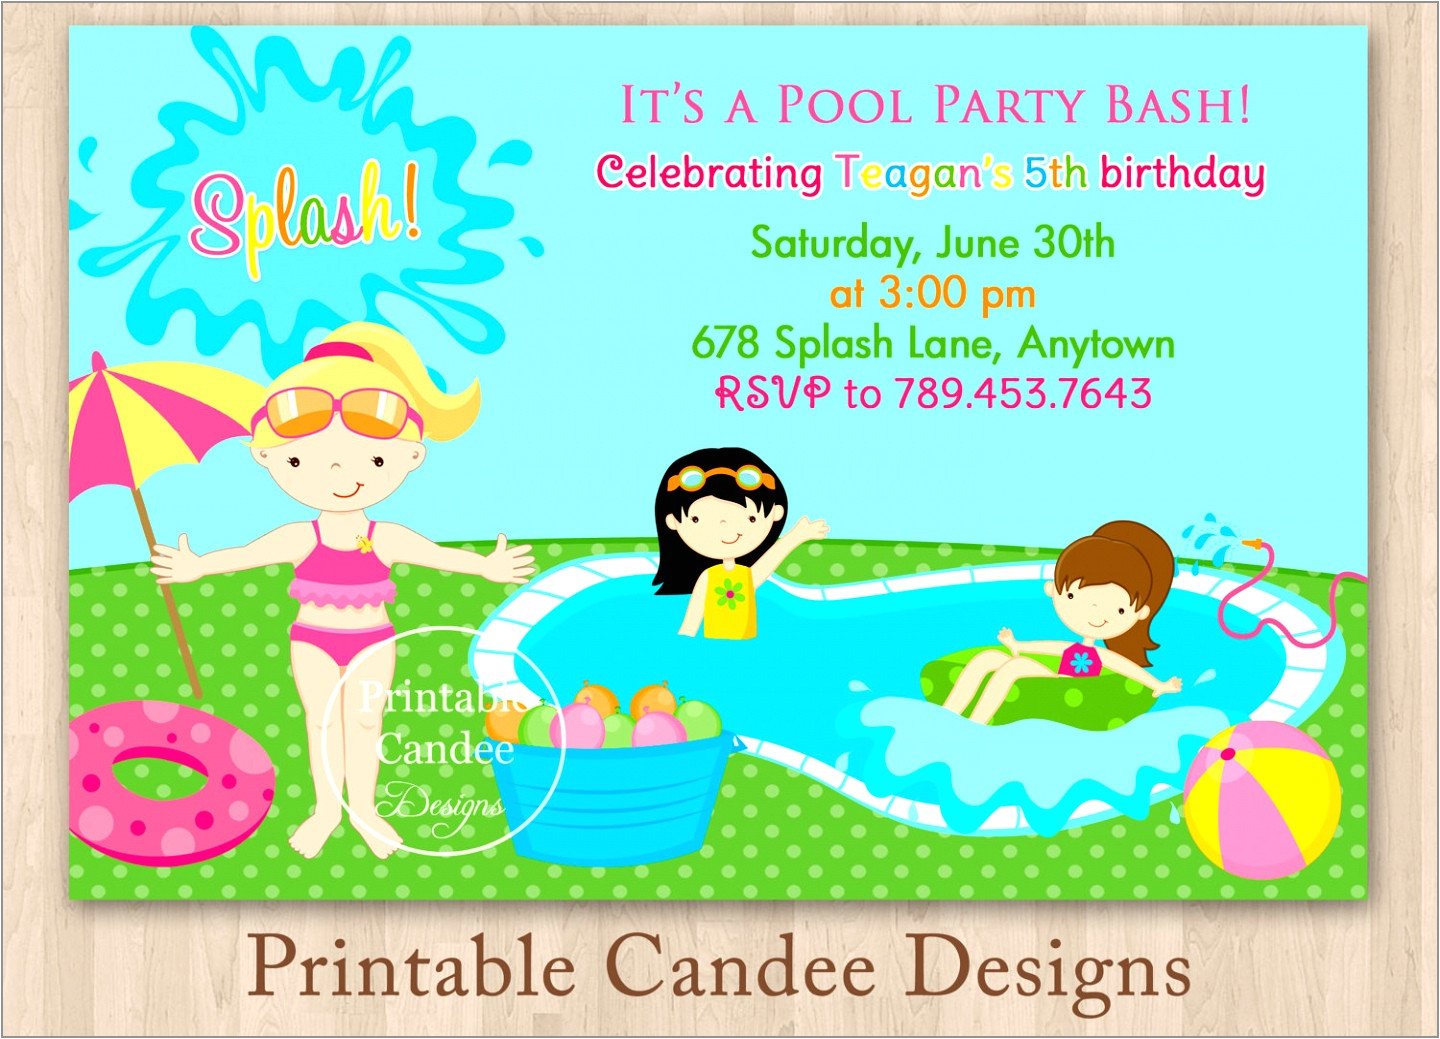 rainbow party invitations template example swimming party invitation template free elegant doc xls letter best templates veyyk ukcut